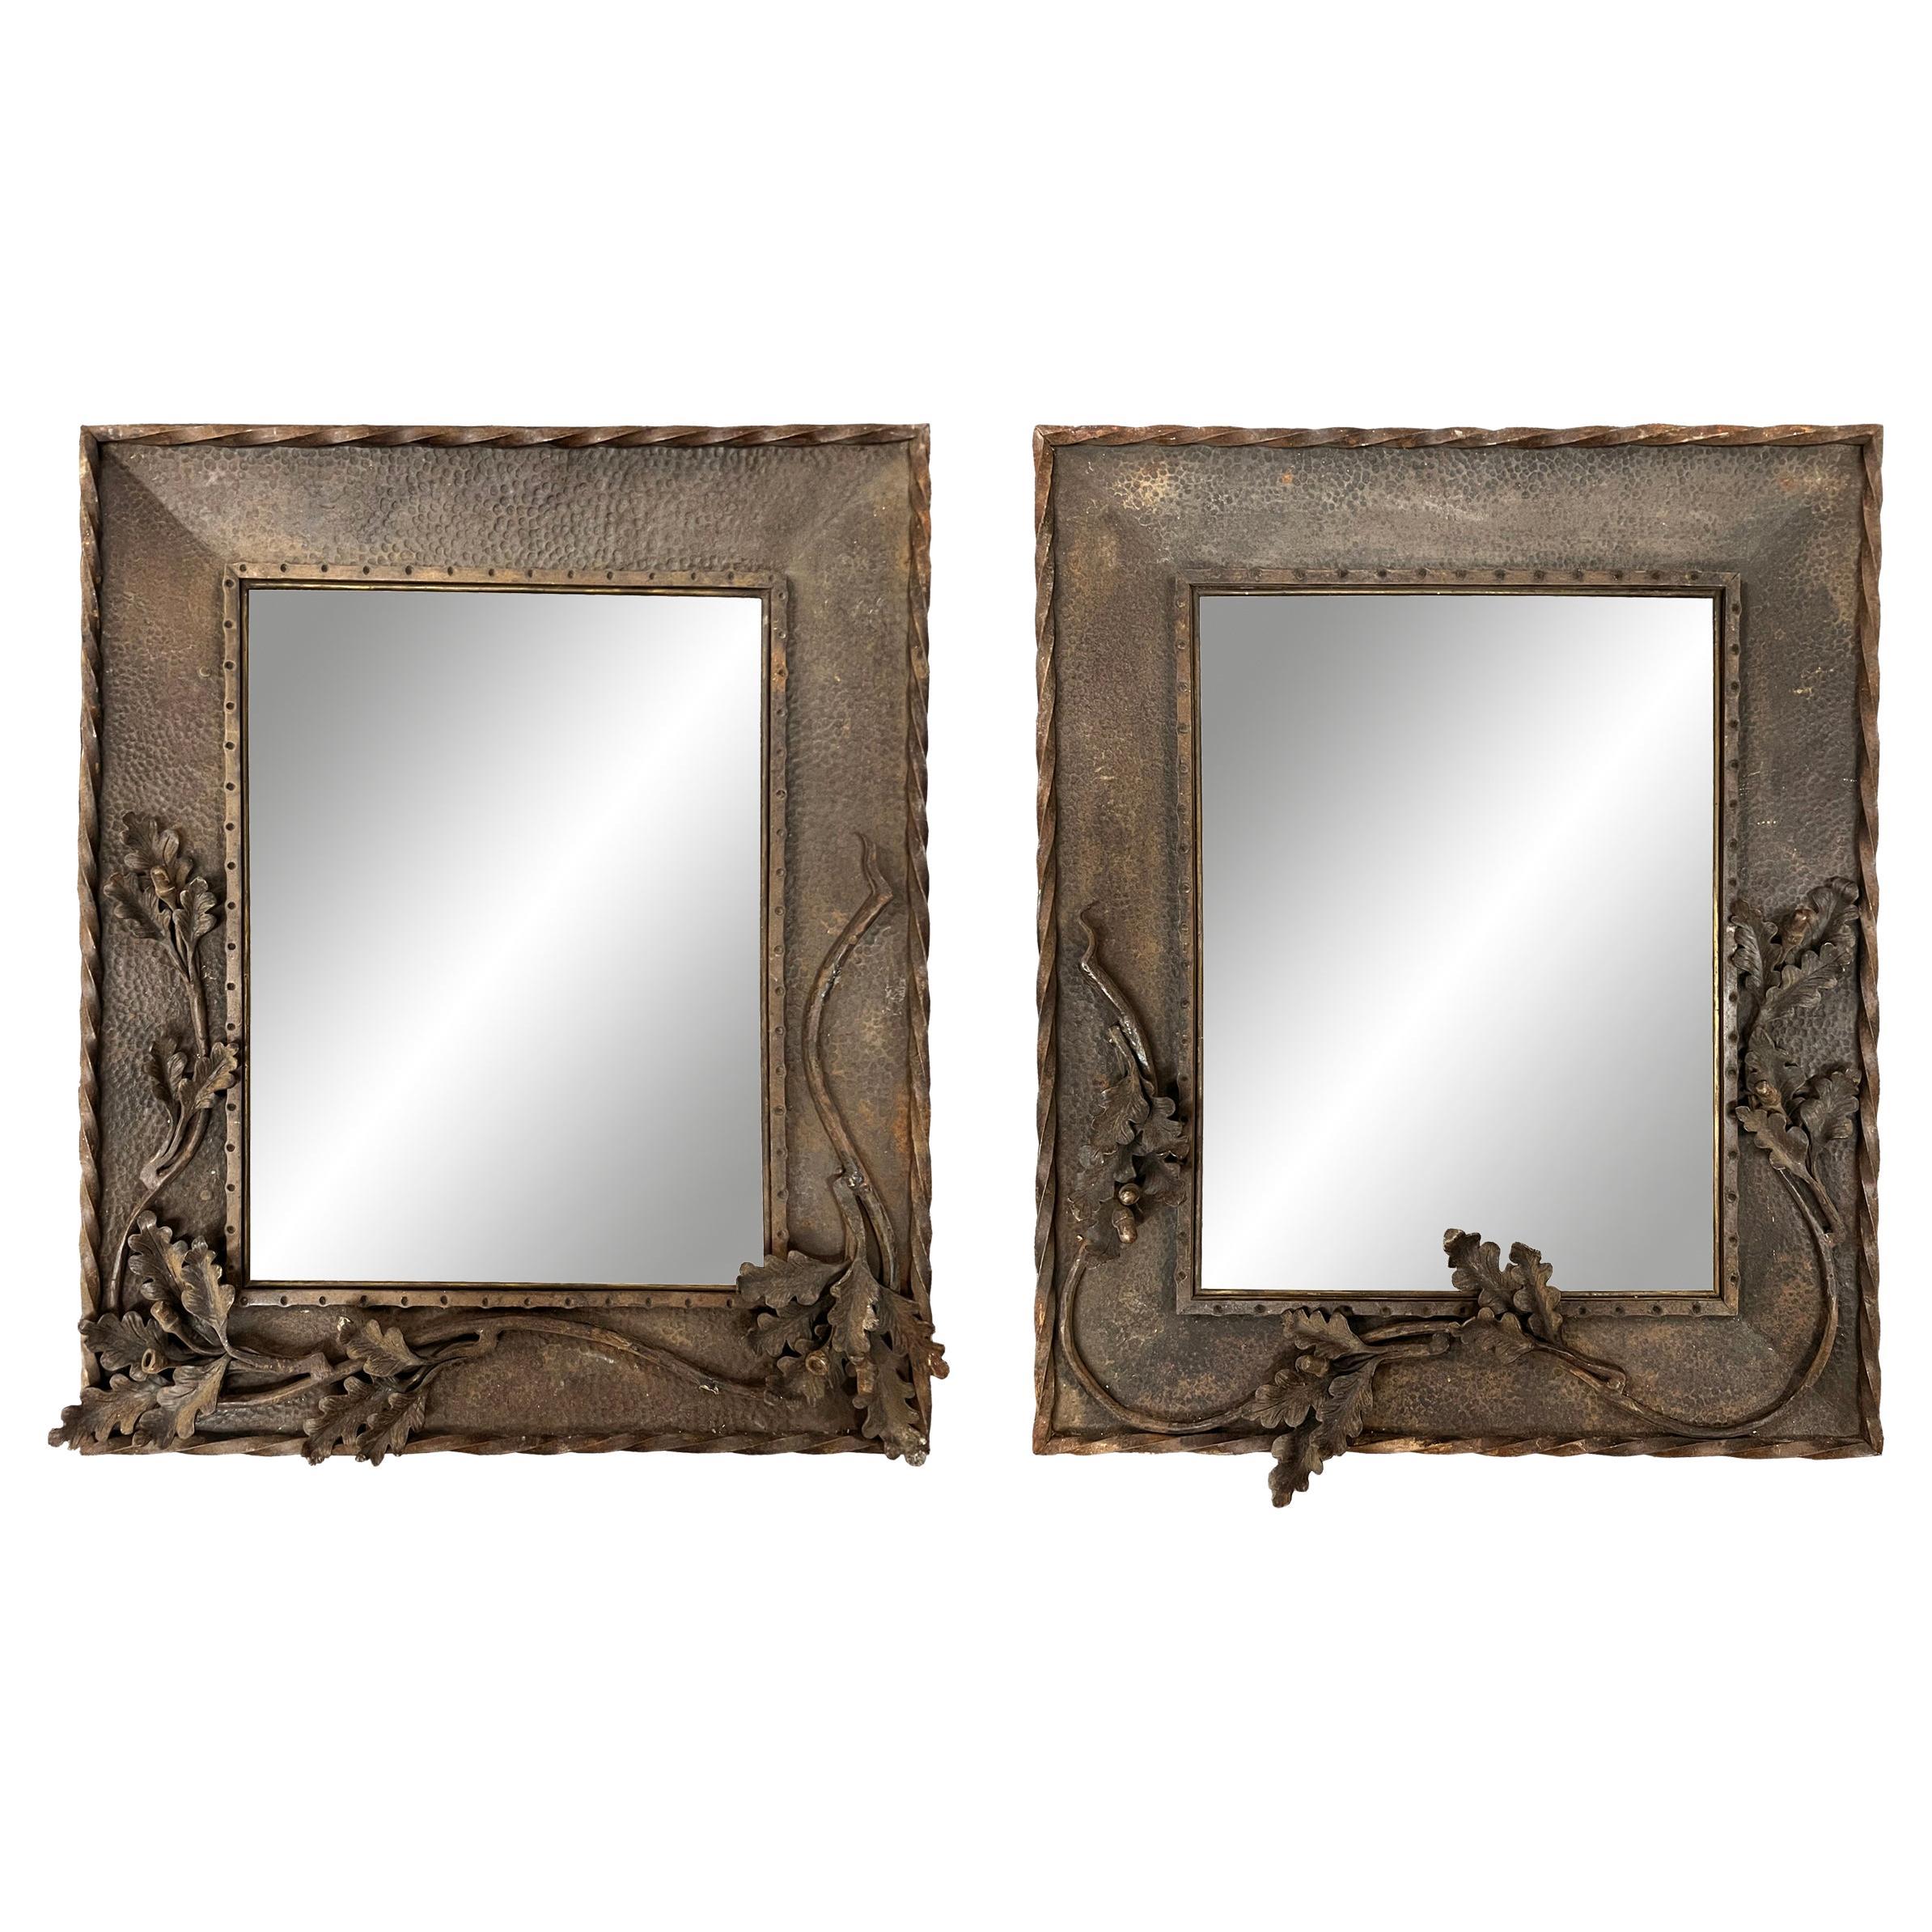 Pair of Early 20th Century French Wrought Iron Oak Leaf Mirrors